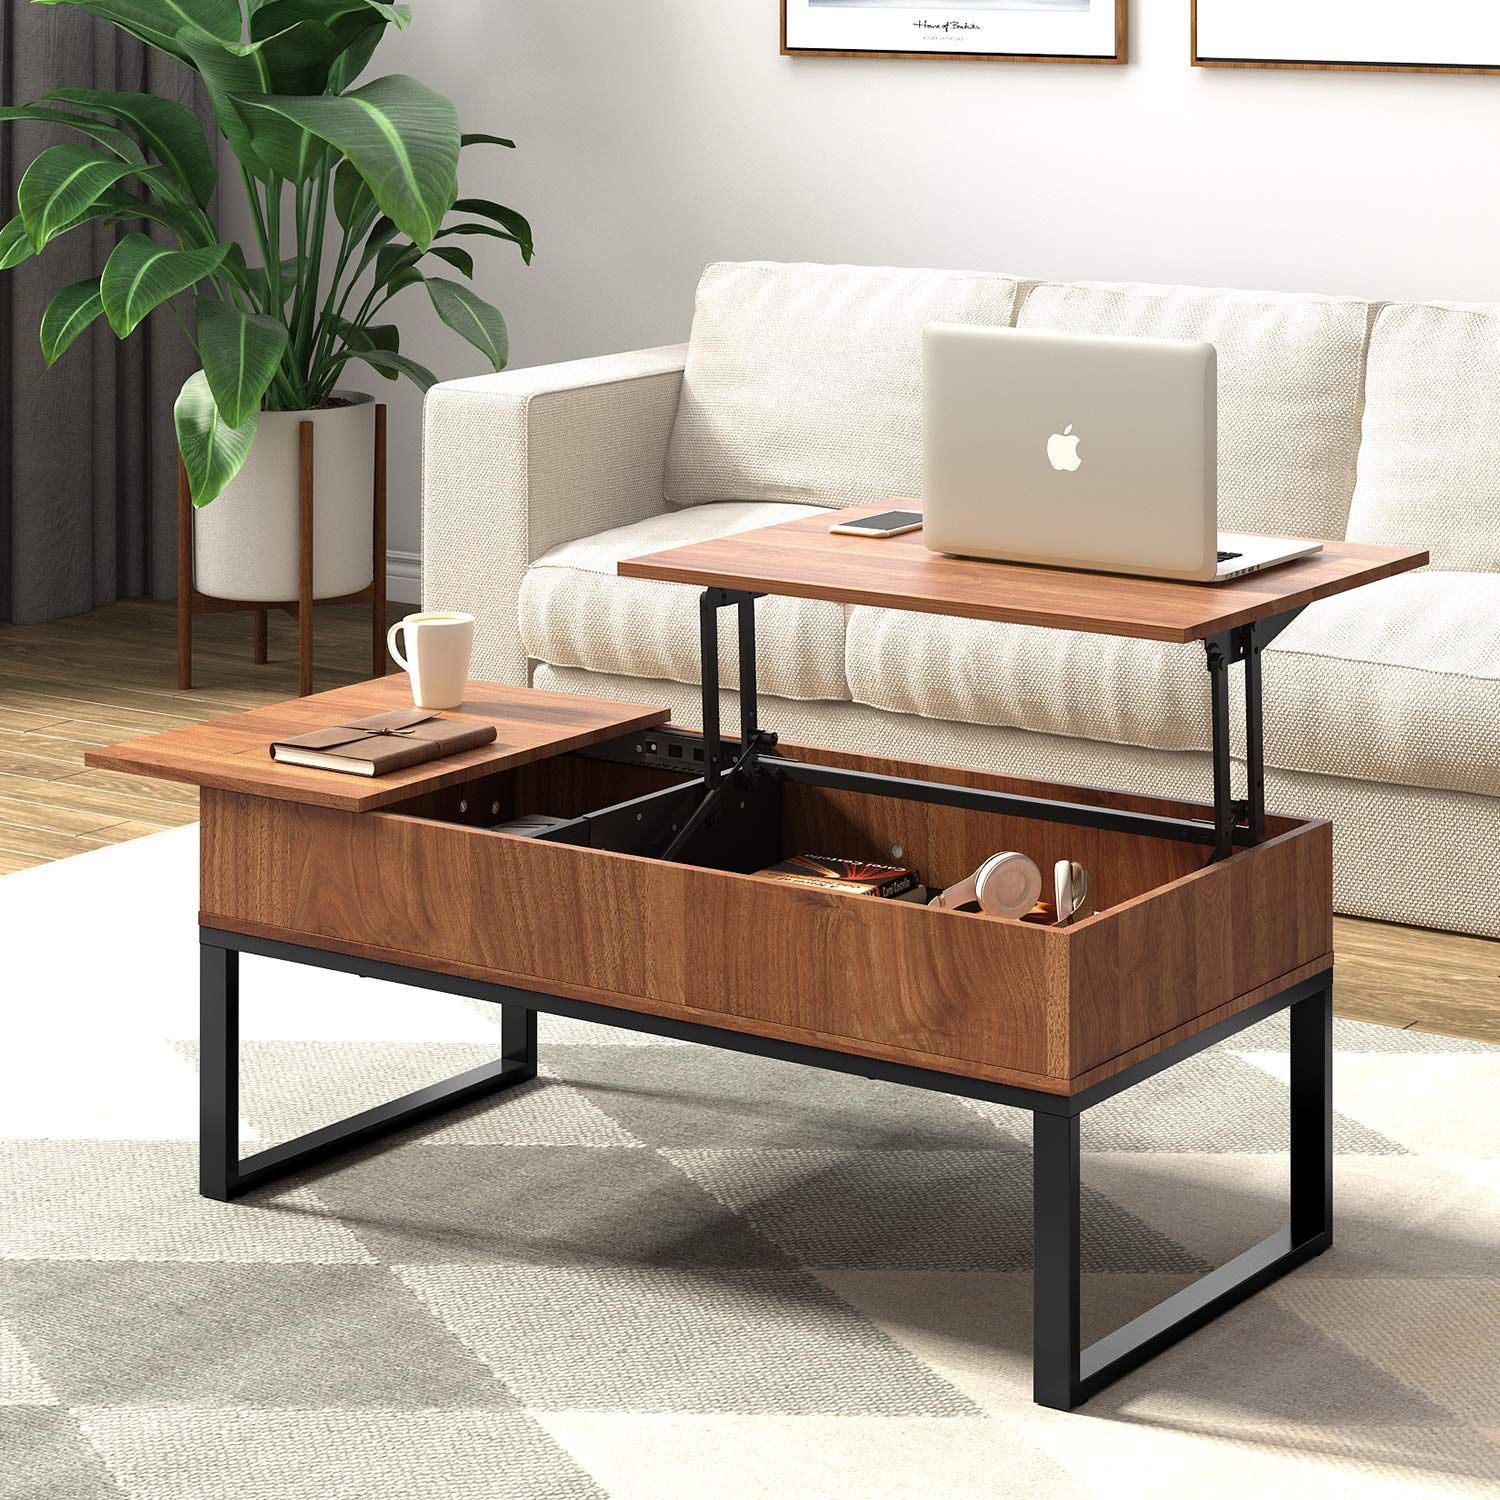 Wlive Wood Coffee Table With Adjustable Lift Top Table, Metal Frame Intended For Coffee Tables With Hidden Compartments (Gallery 17 of 20)